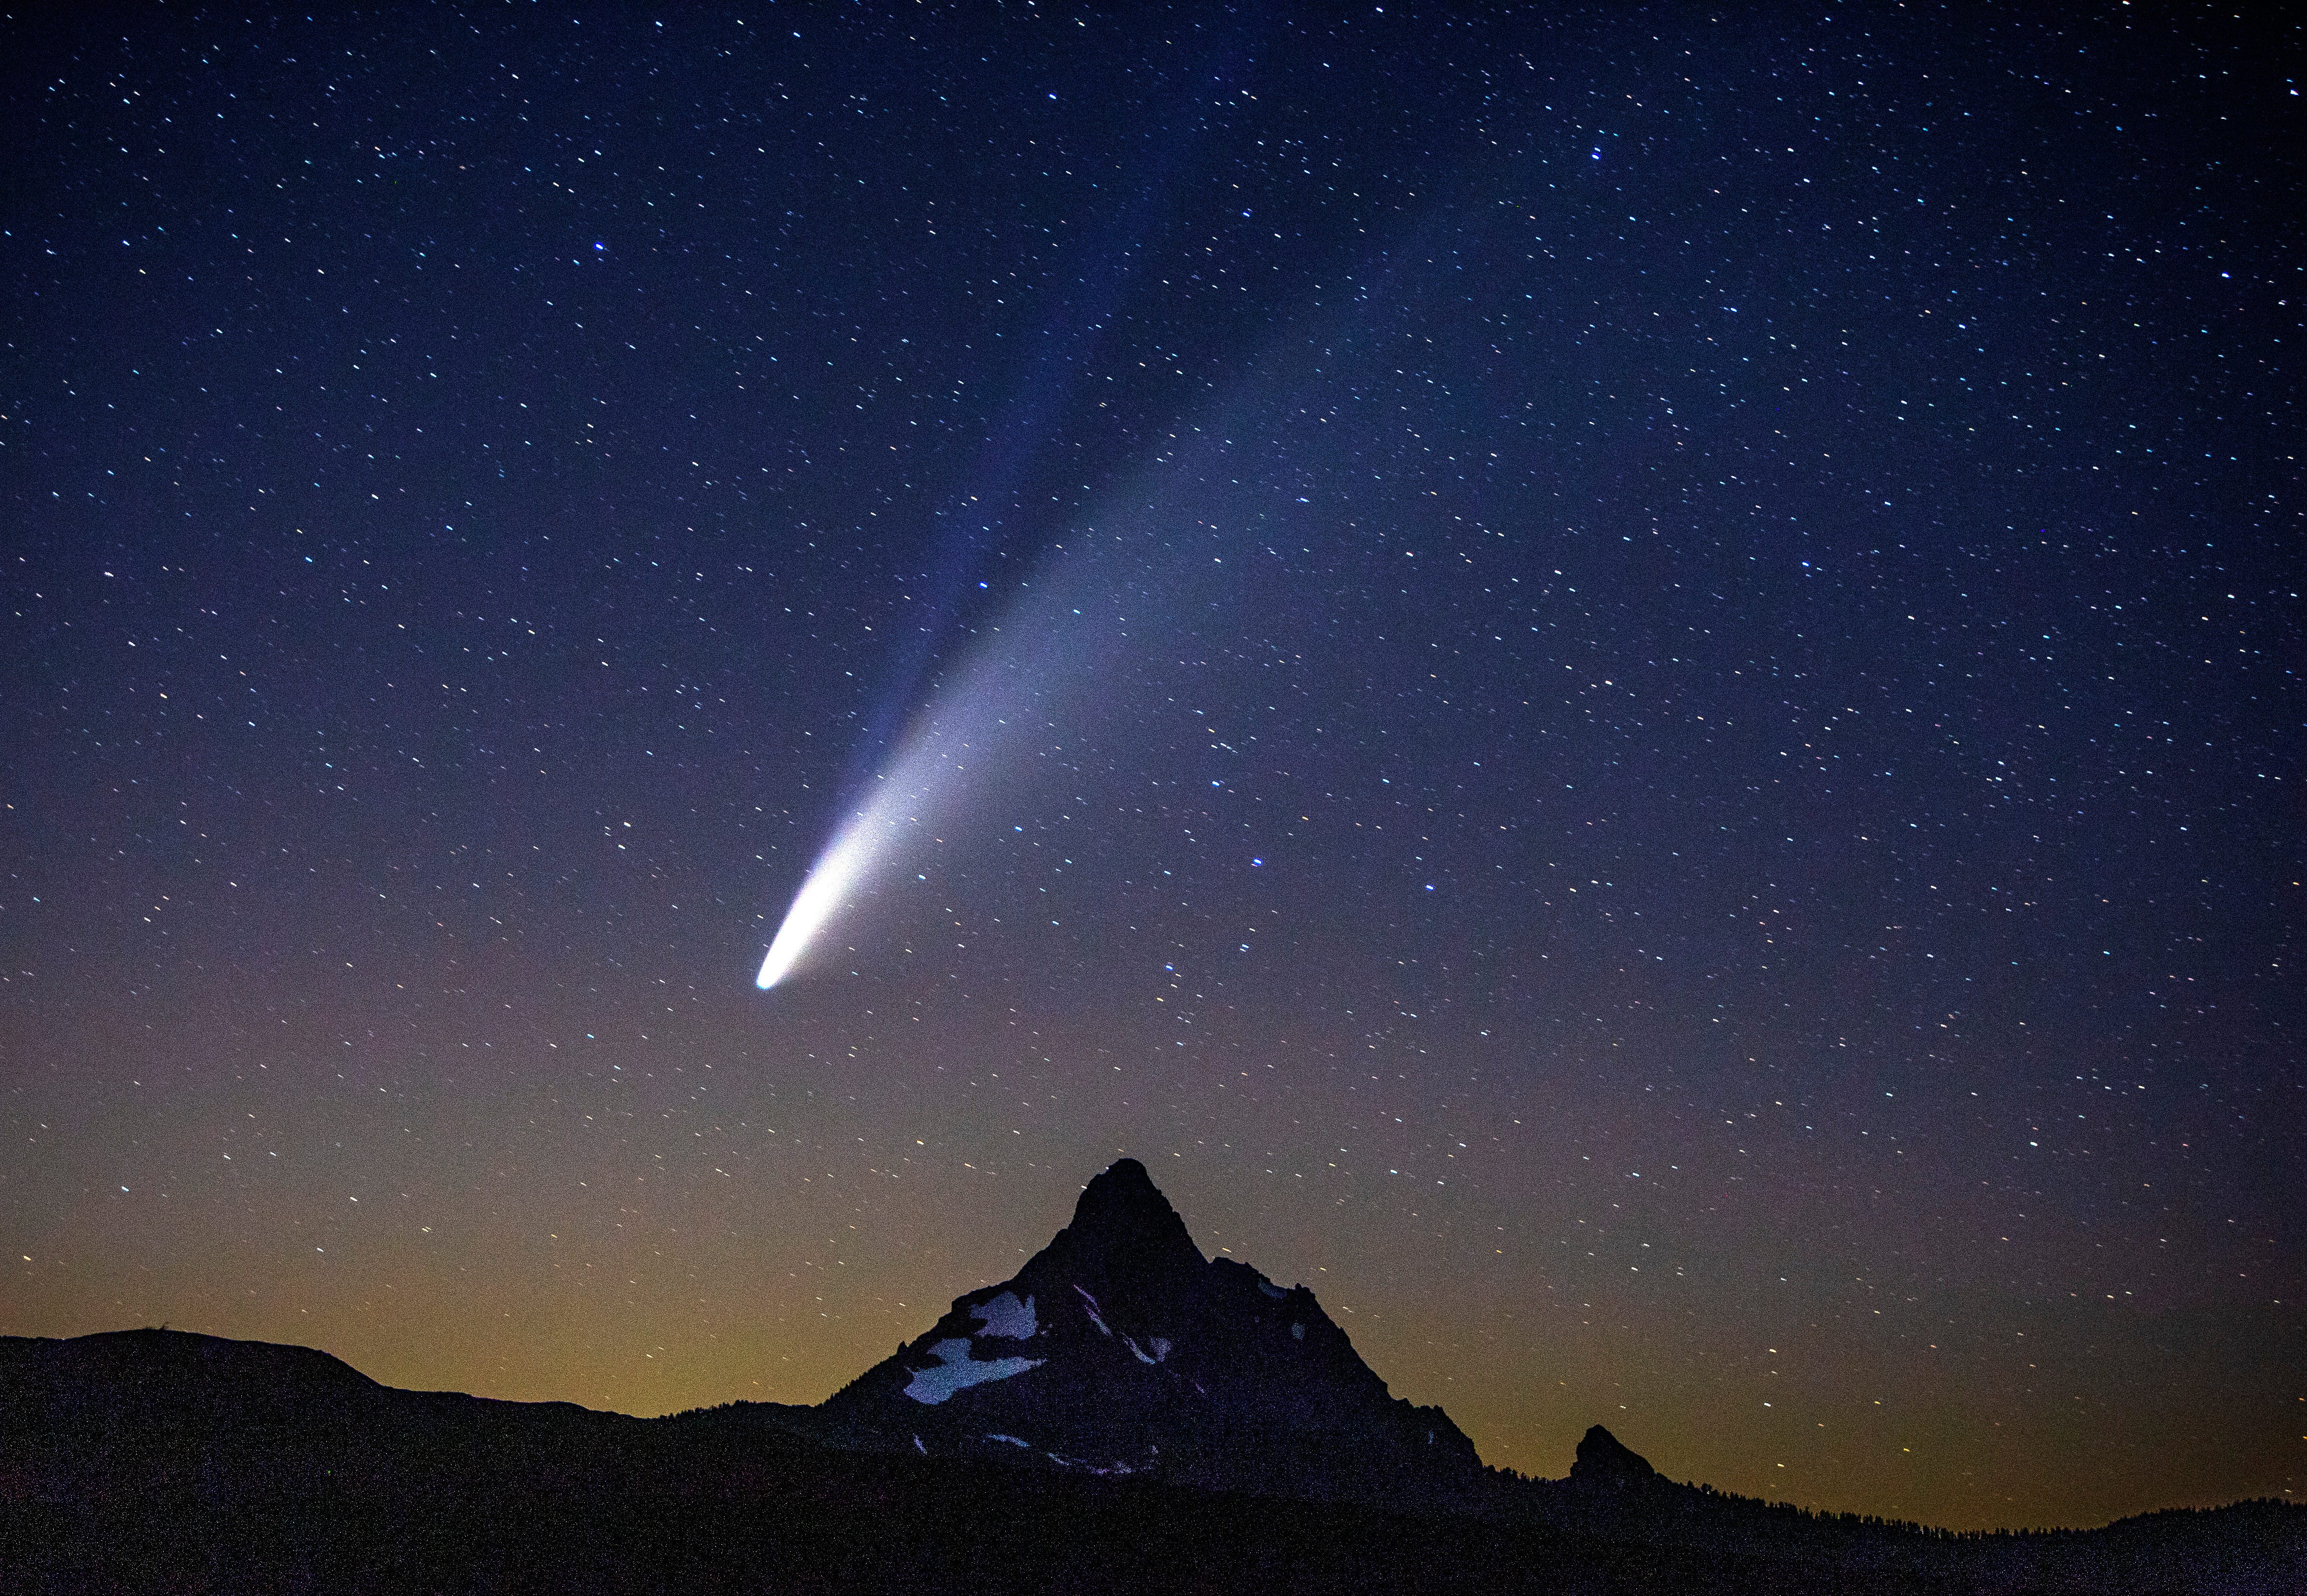 Neowise, meteor showers and other comet tales